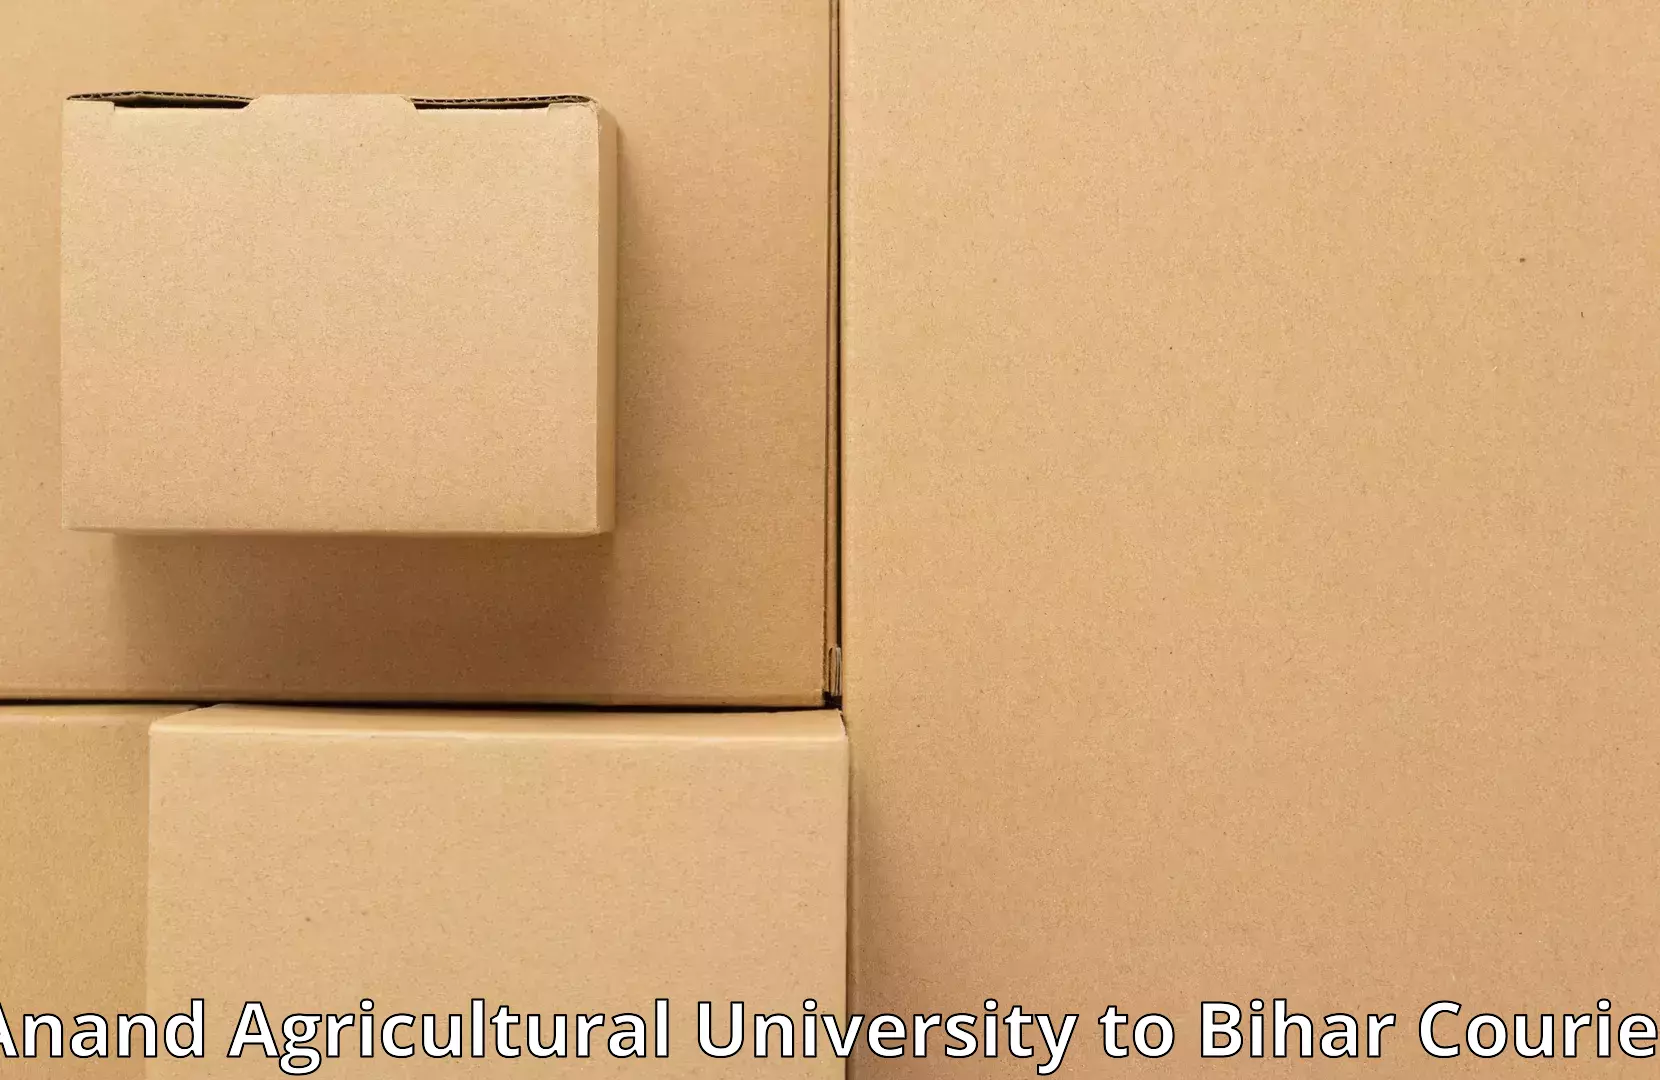 Furniture transport specialists Anand Agricultural University to Bihar